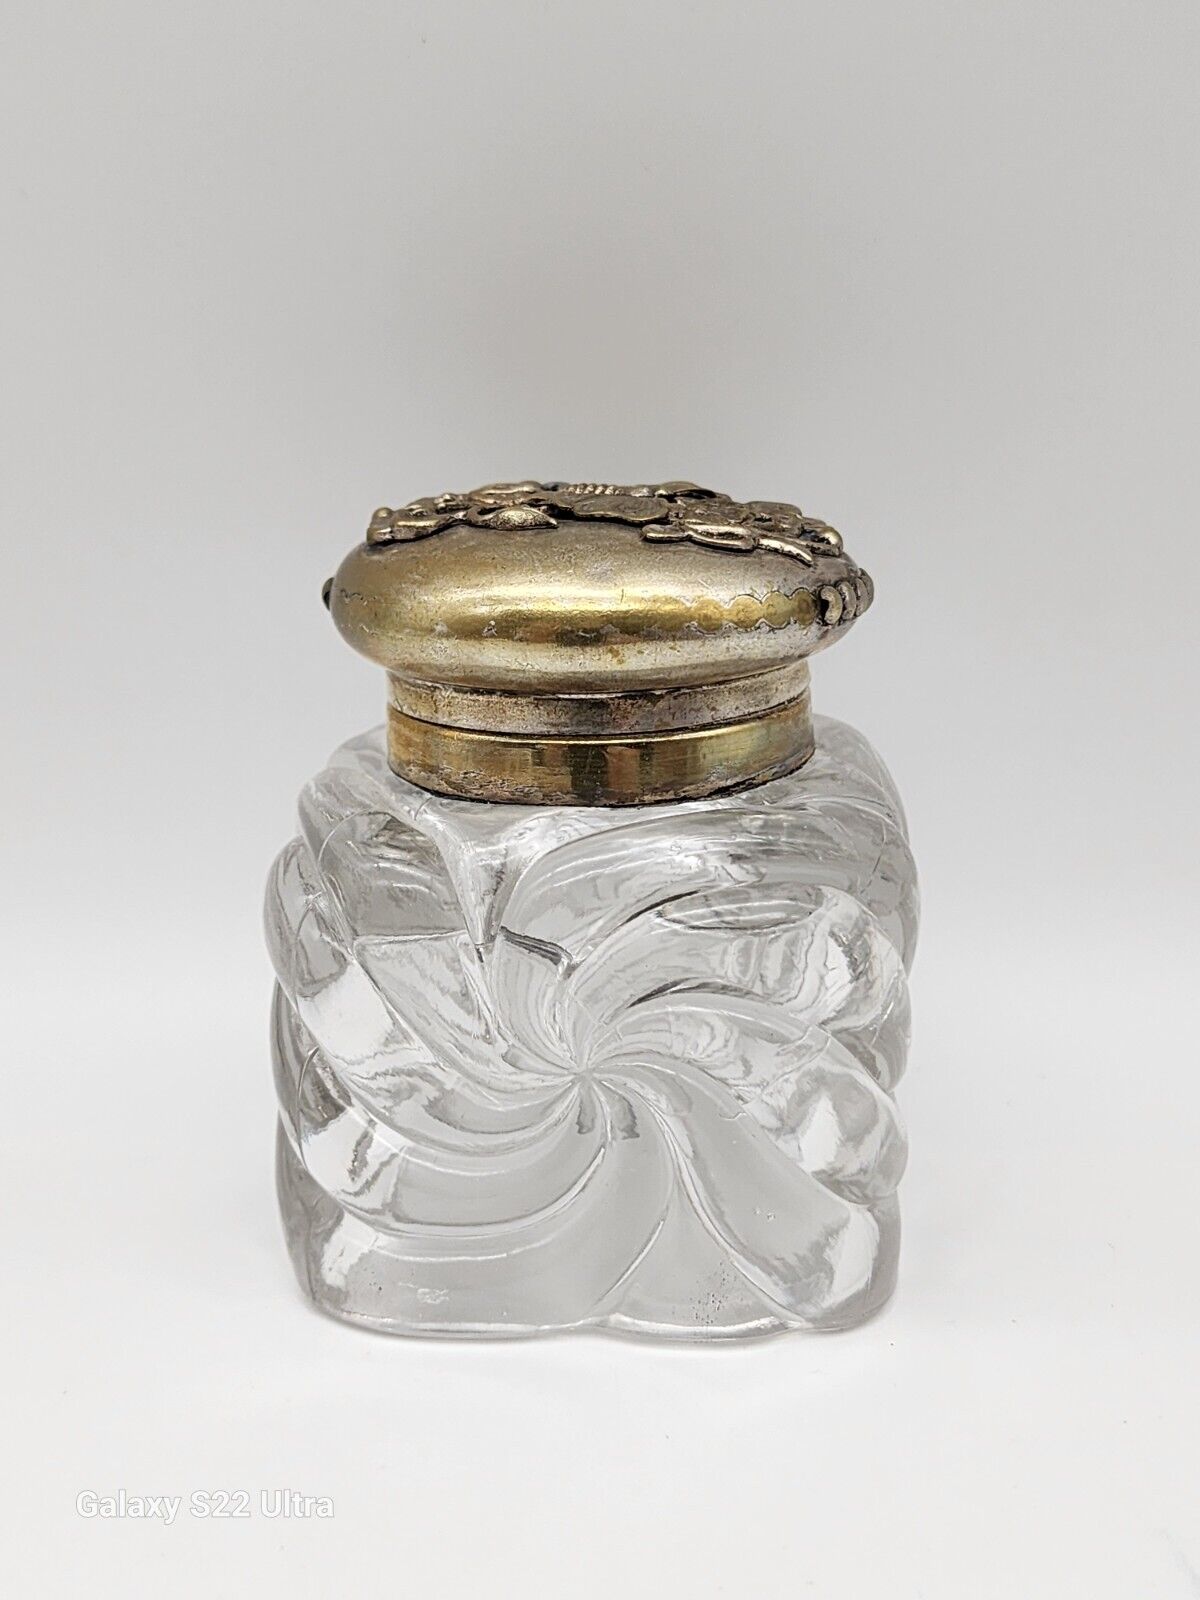 NICE 1890-1900 ANTIQUE BACCARAT CRYSTAL INKWELL W/HINGED BUTTERFLY REPOUSSÉ LID